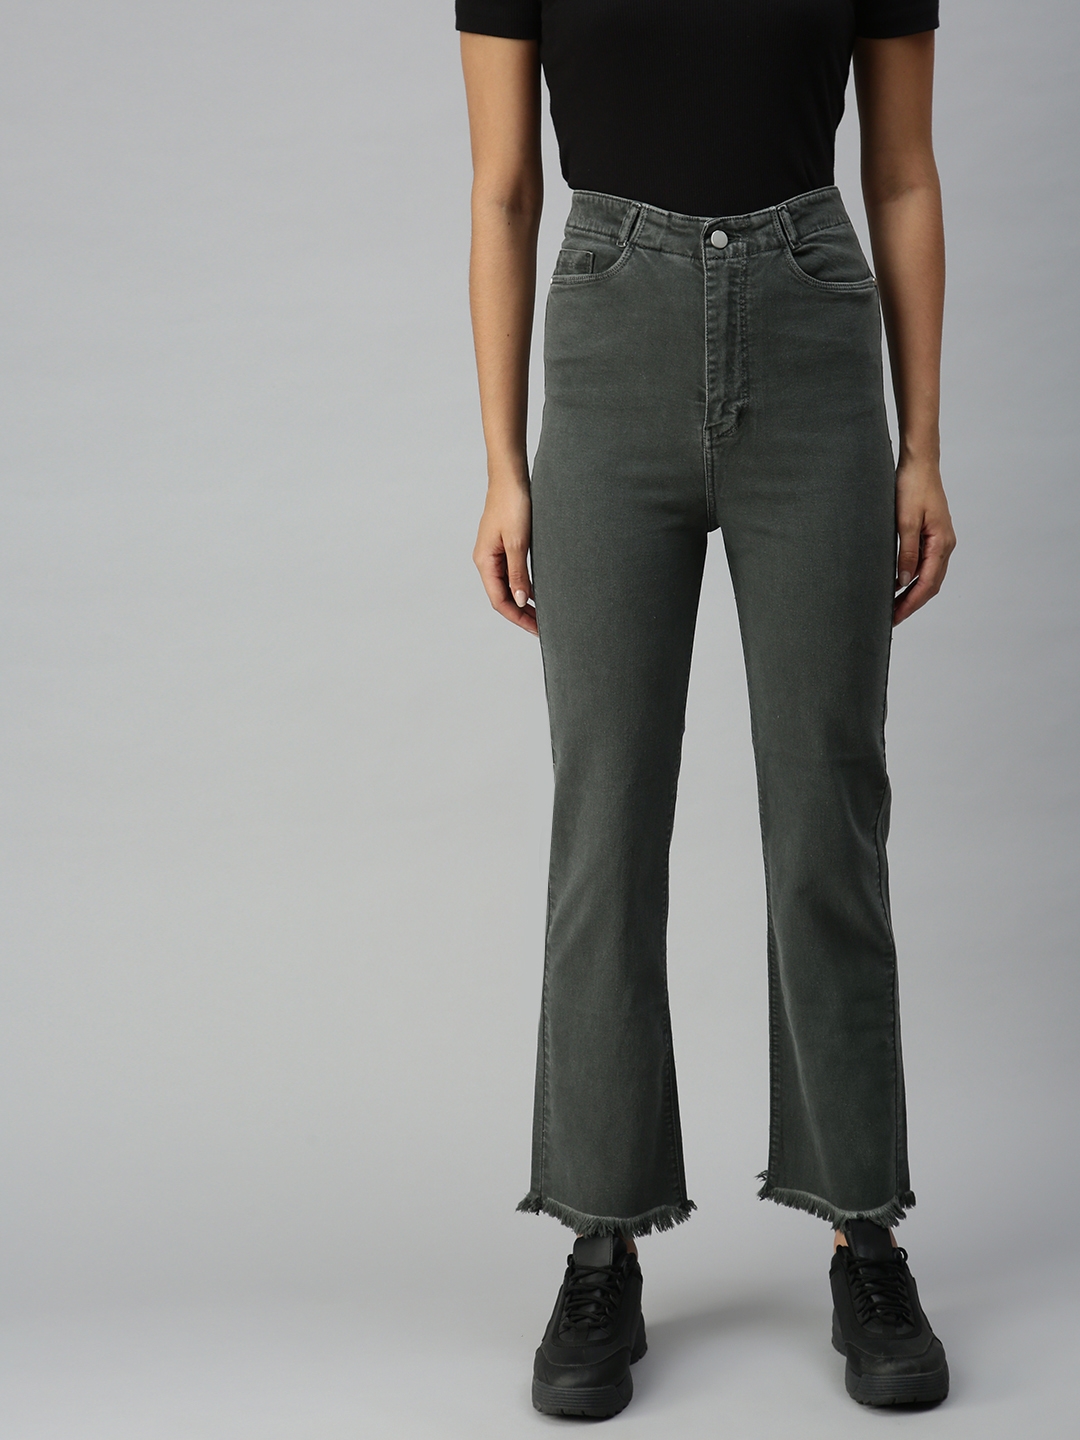 Women's Grey Others Solid Jeans